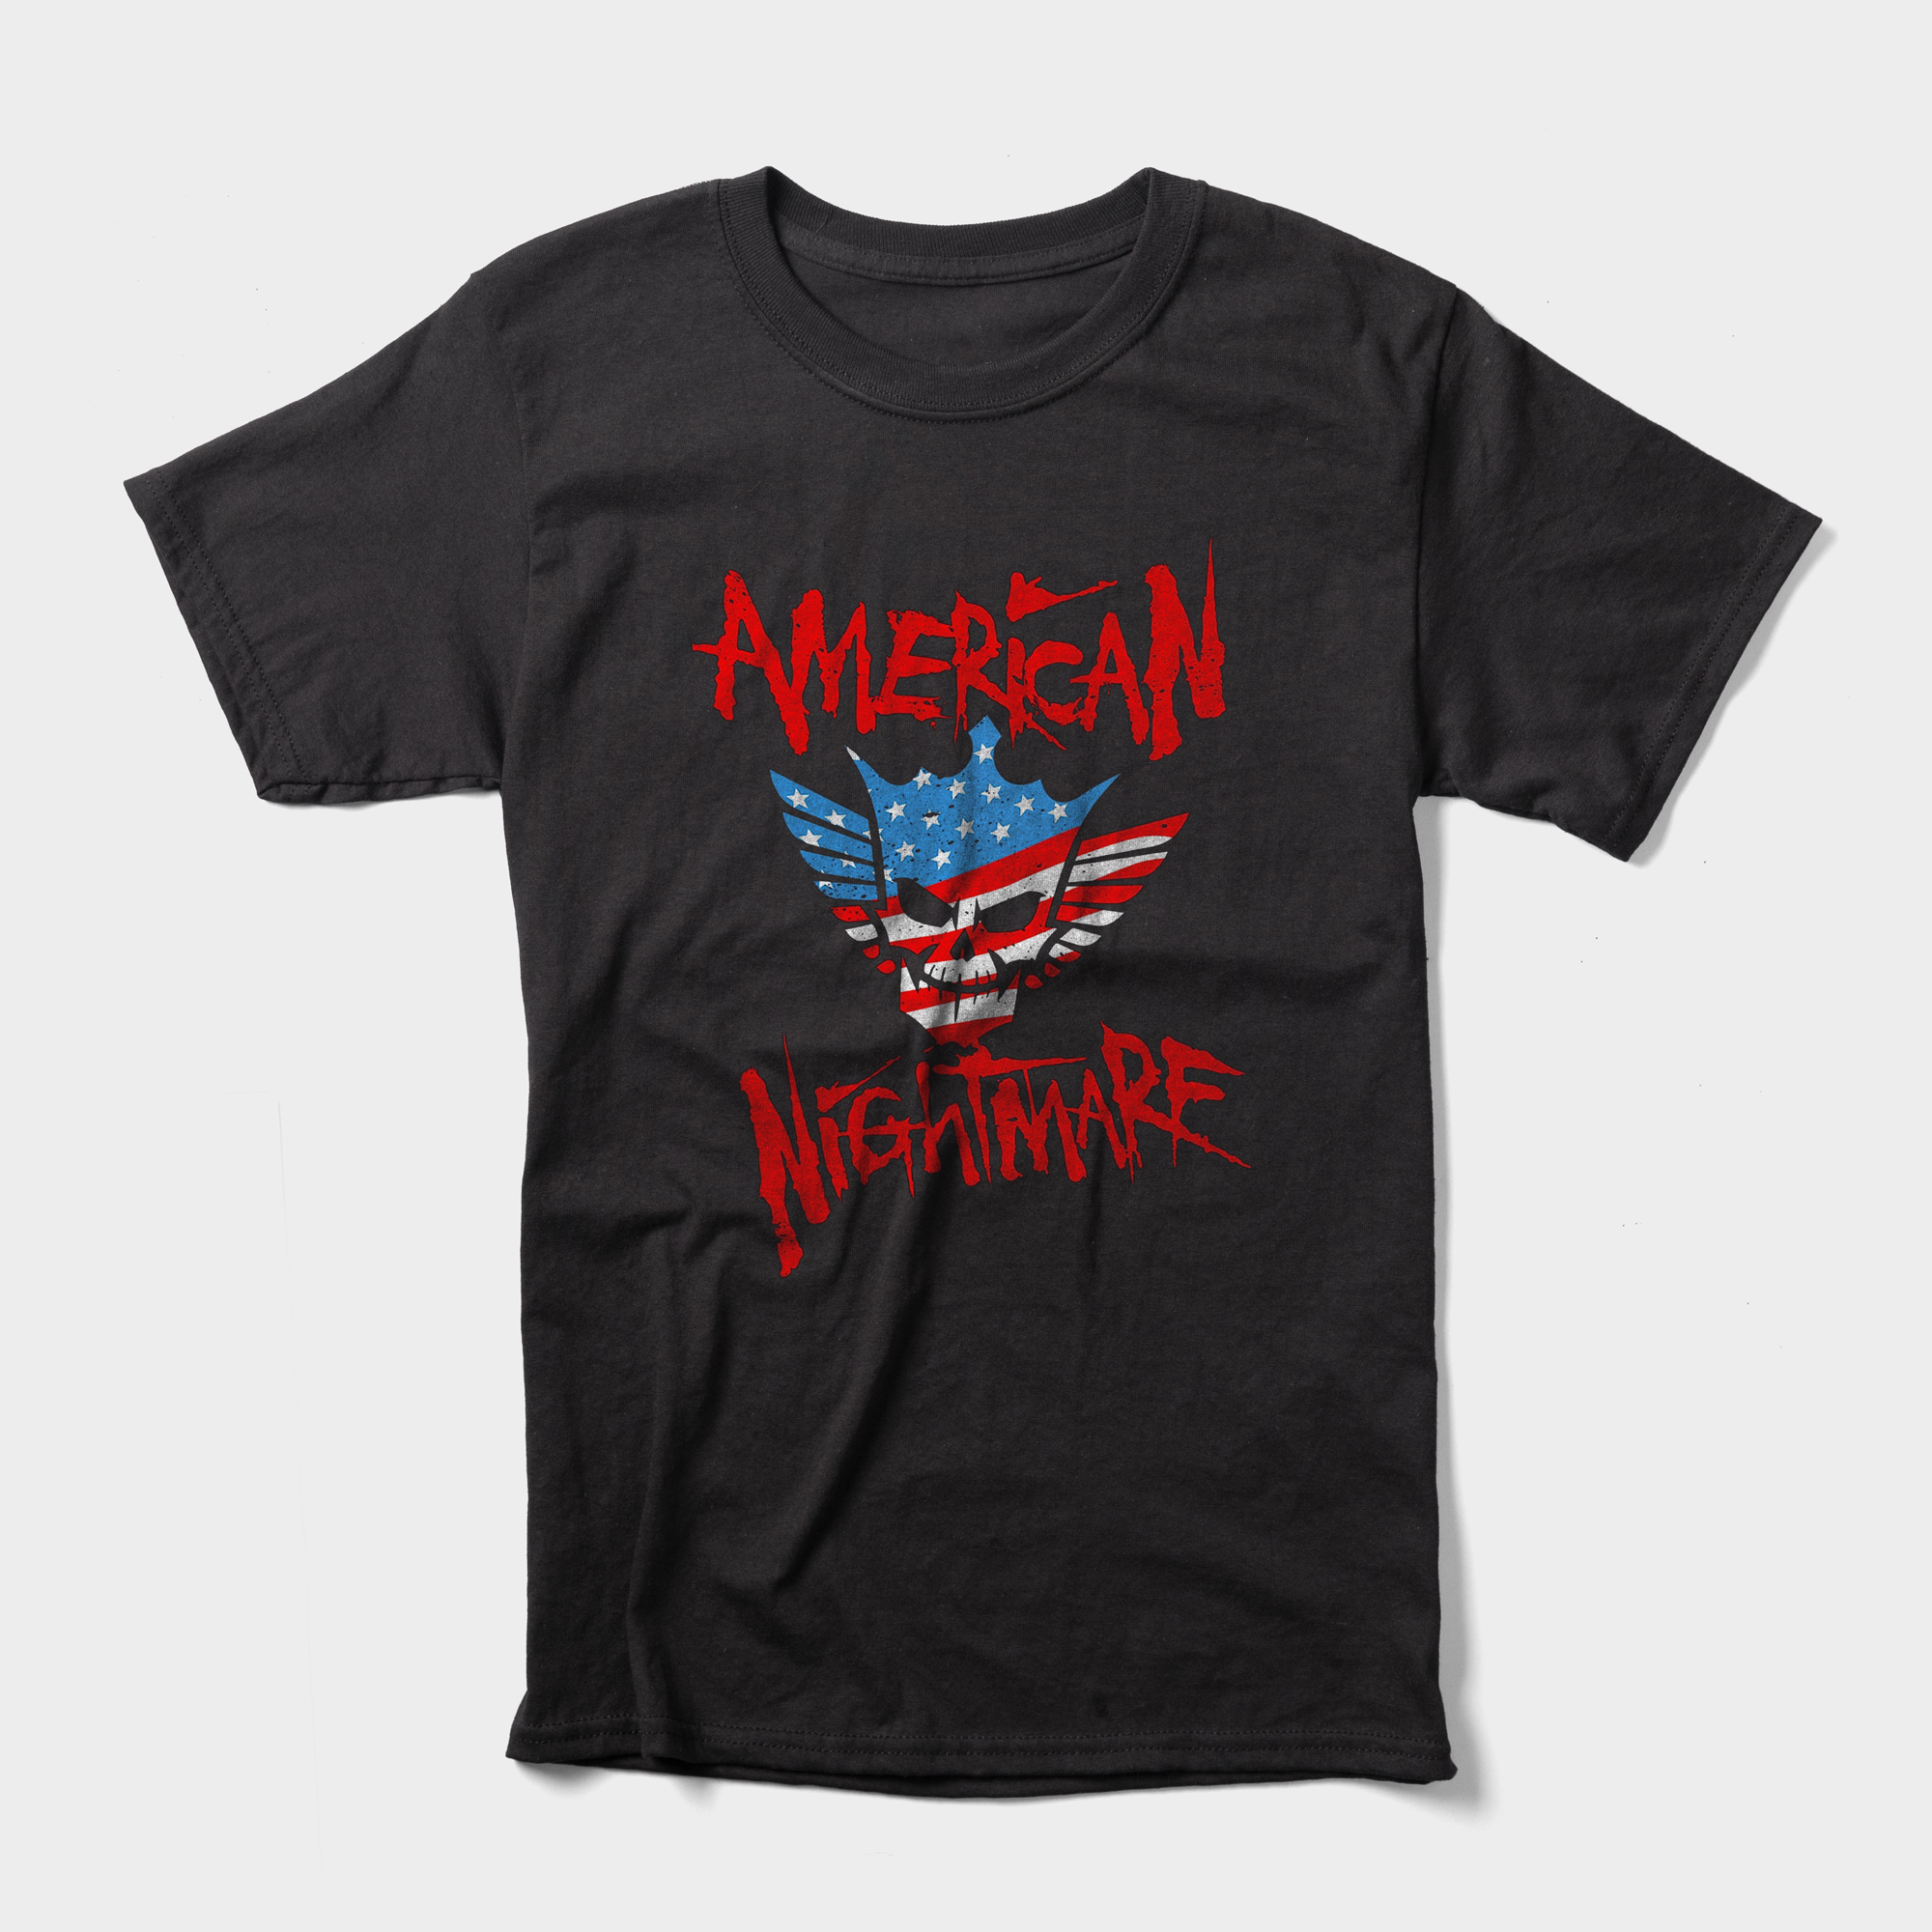 Cody Rhodes' black t-shirt says "American Nightmare" and features his logo. 